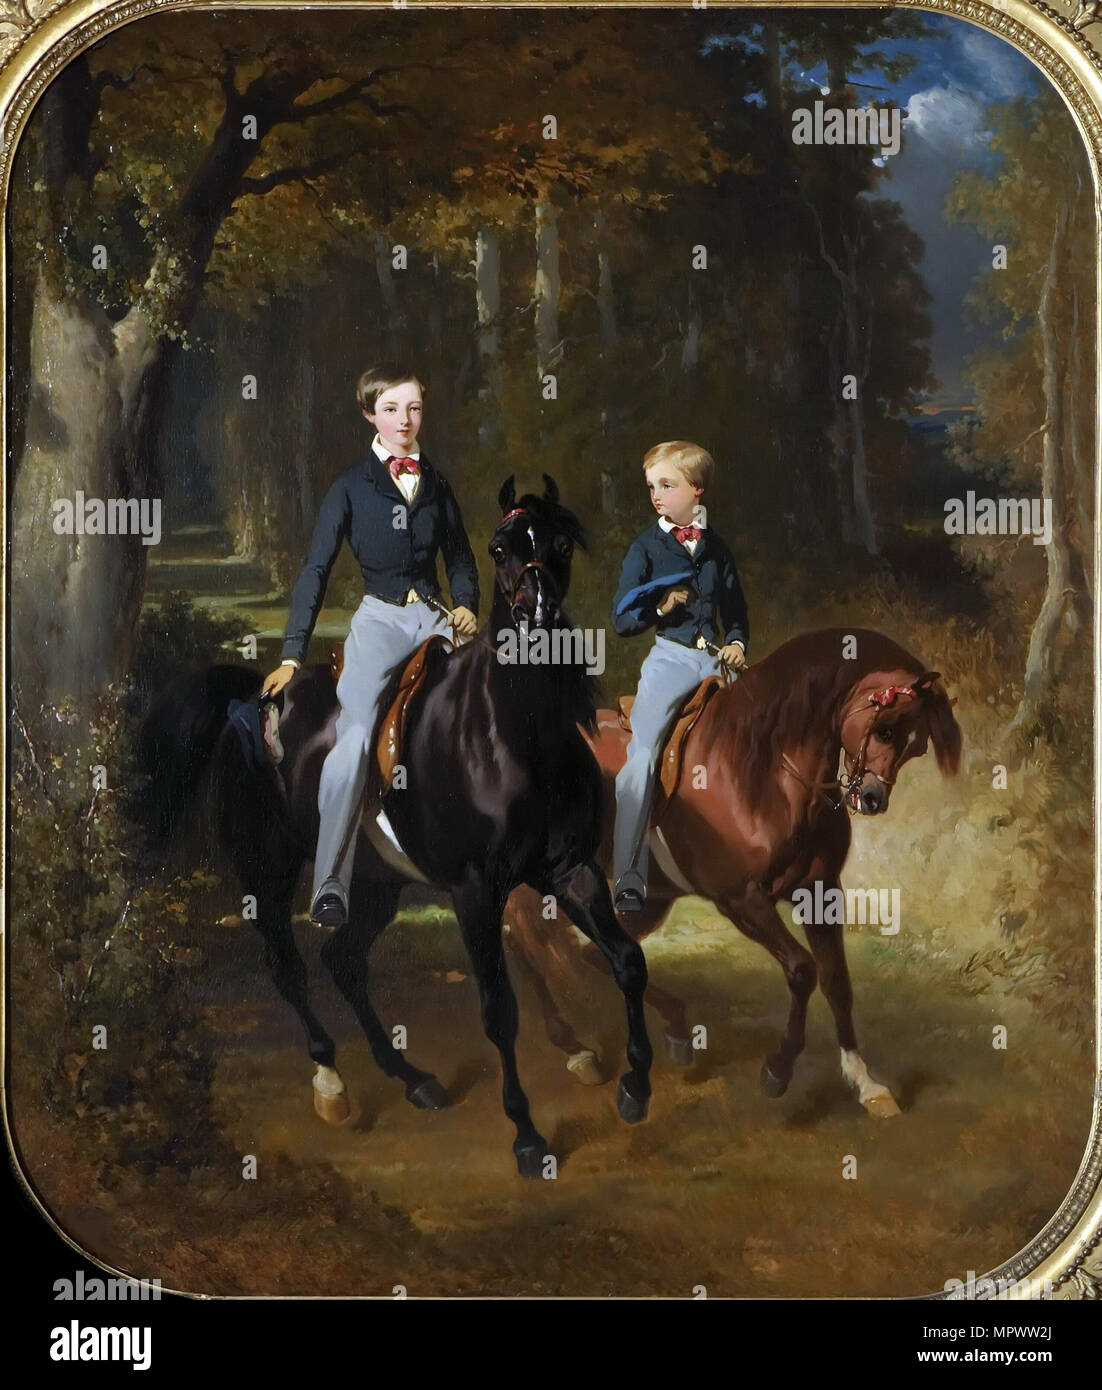 Prince Philippe of Orléans (1838-1894), Comte de Paris and his Brother, Robert d'Orleans (1840-1910) Stock Photo